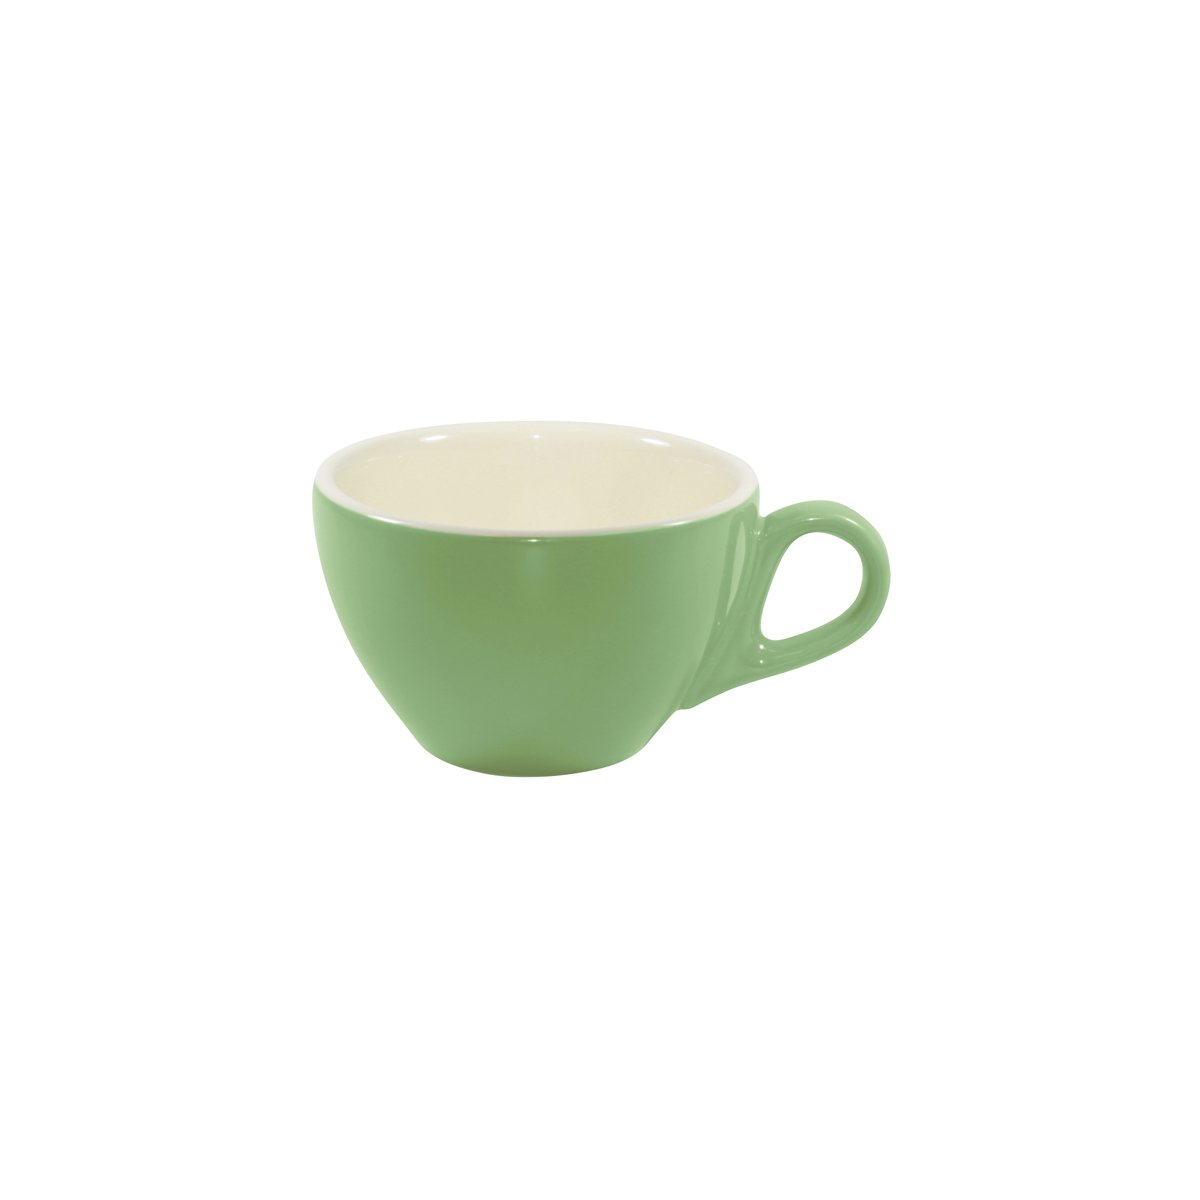 BW0230 Brew Sage Cappuccino Cup 220ml Tomkin Australia Hospitality Supplies